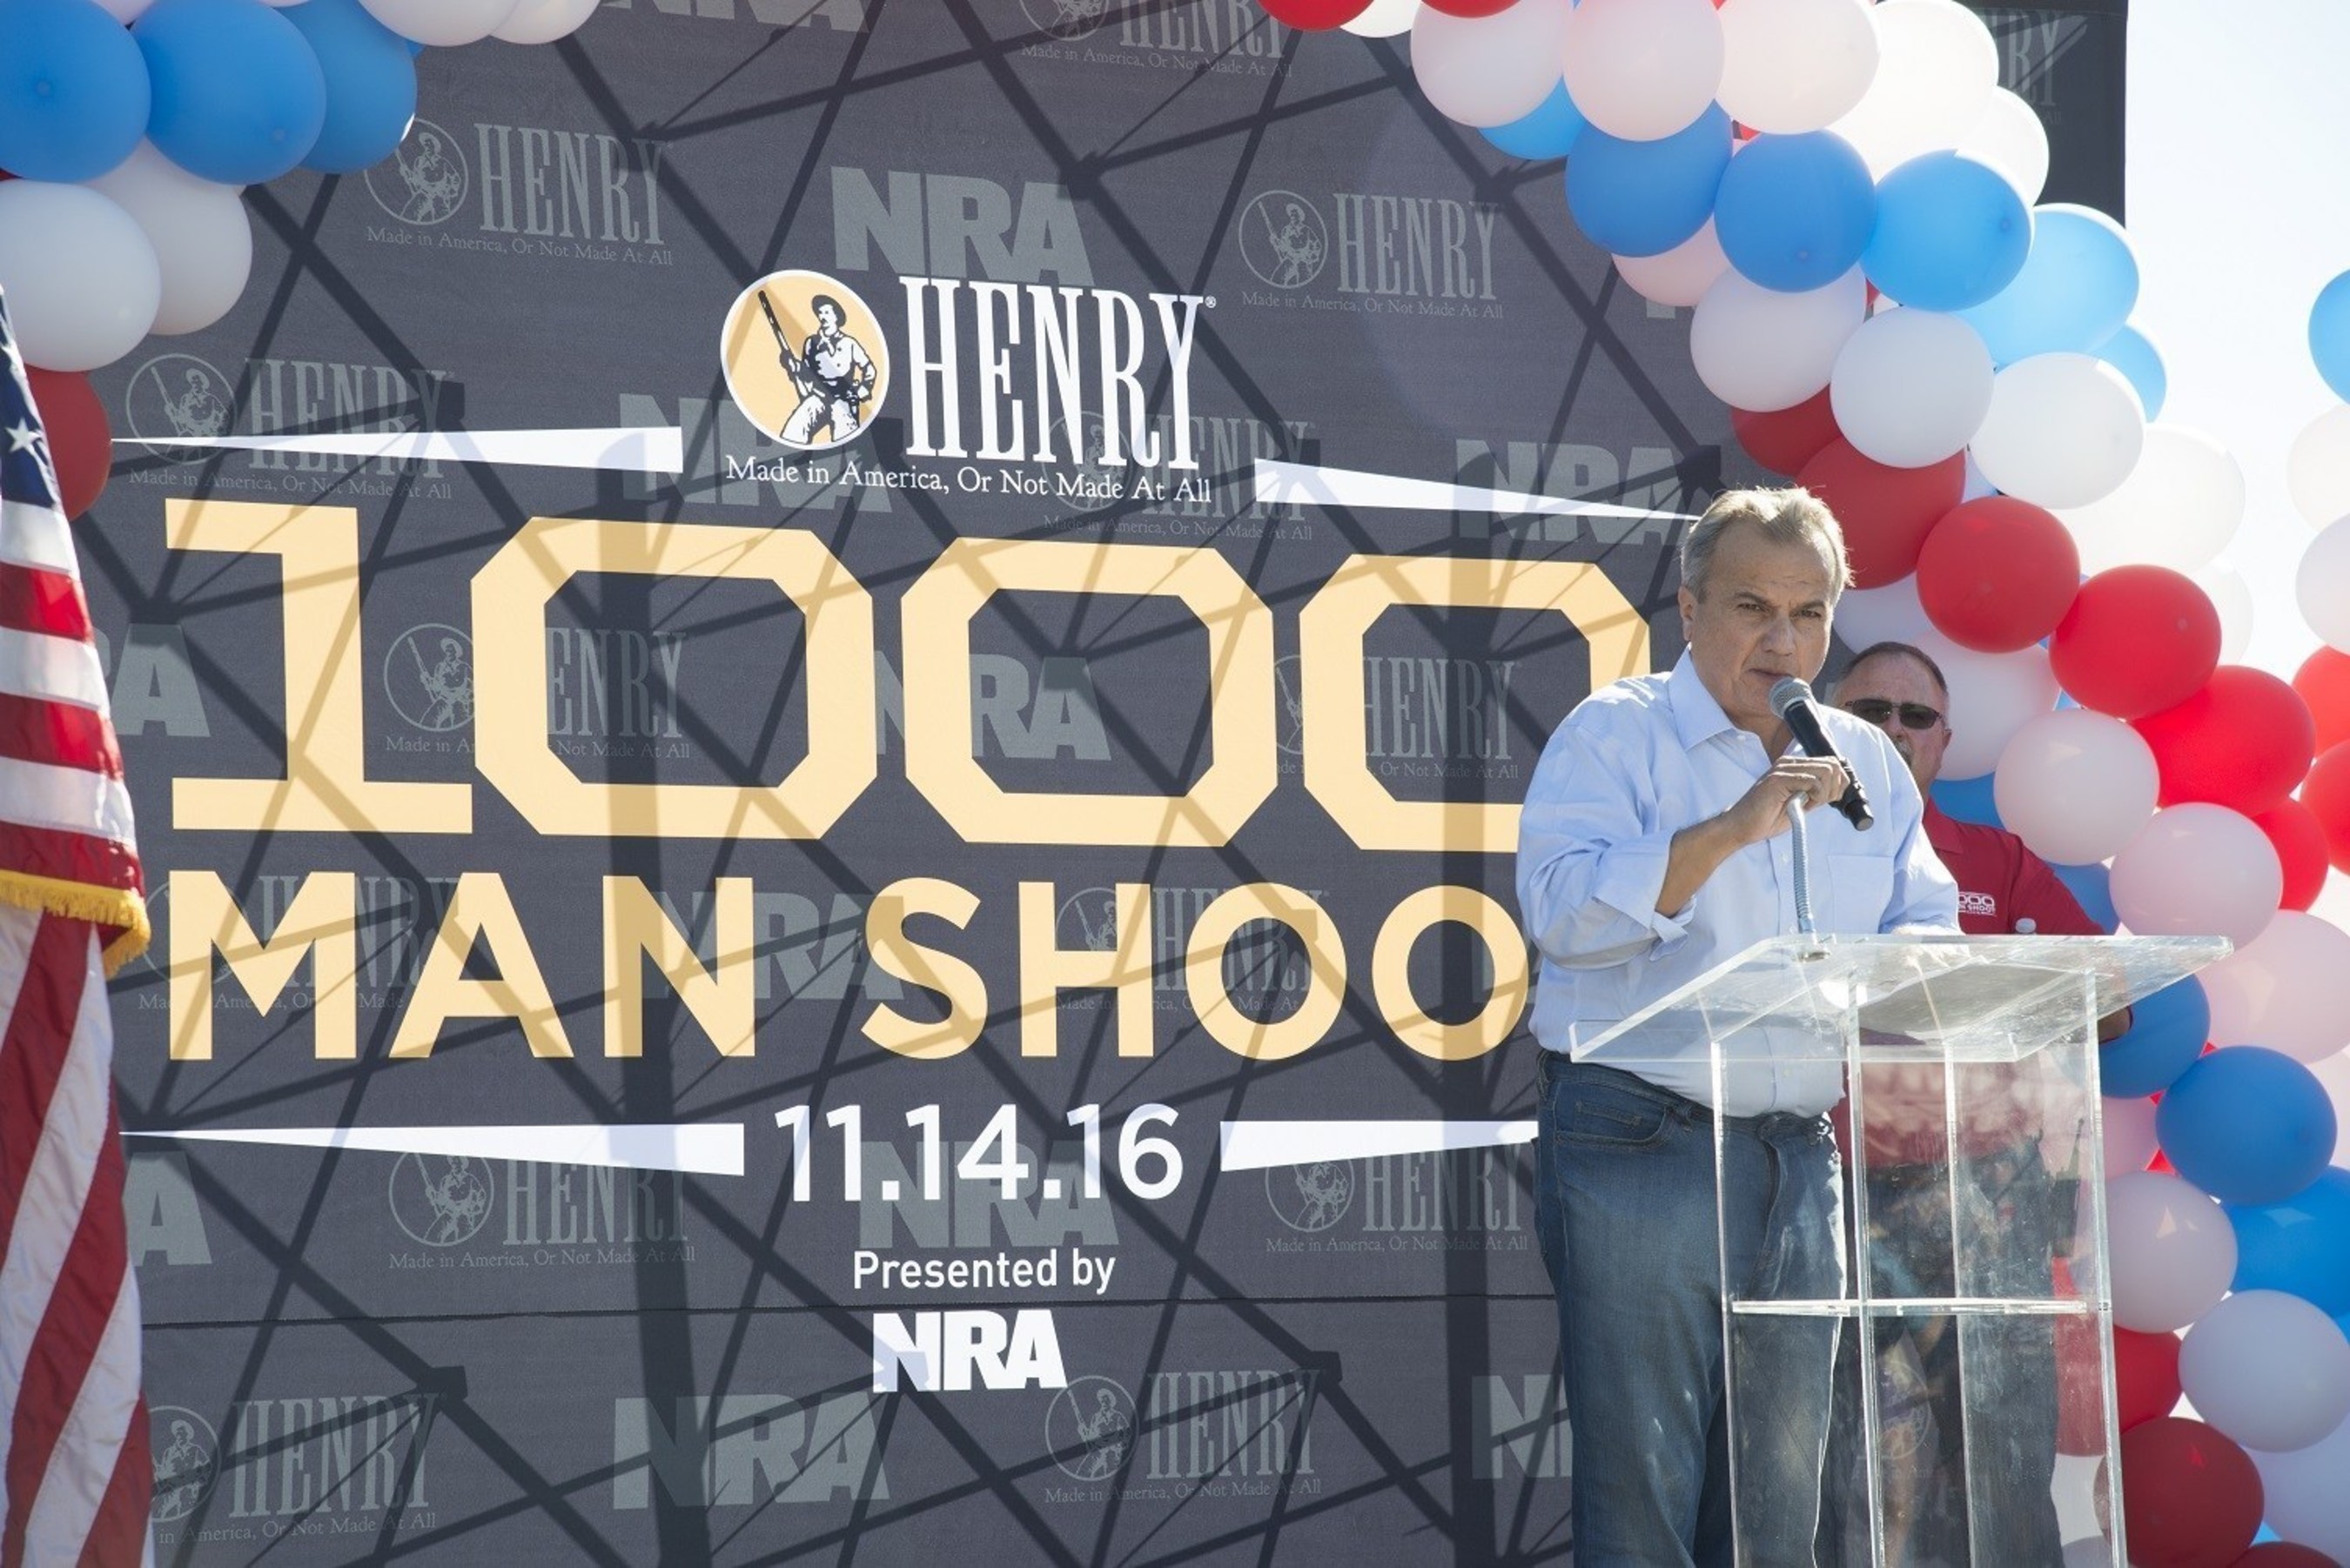 Anthony Imperato, President of Henry Repeating Arms welcomes the crowd at the Henry 1000 Man Shoot held at the Ben Avery Shooting Facility on Monday, November 14, 2016.